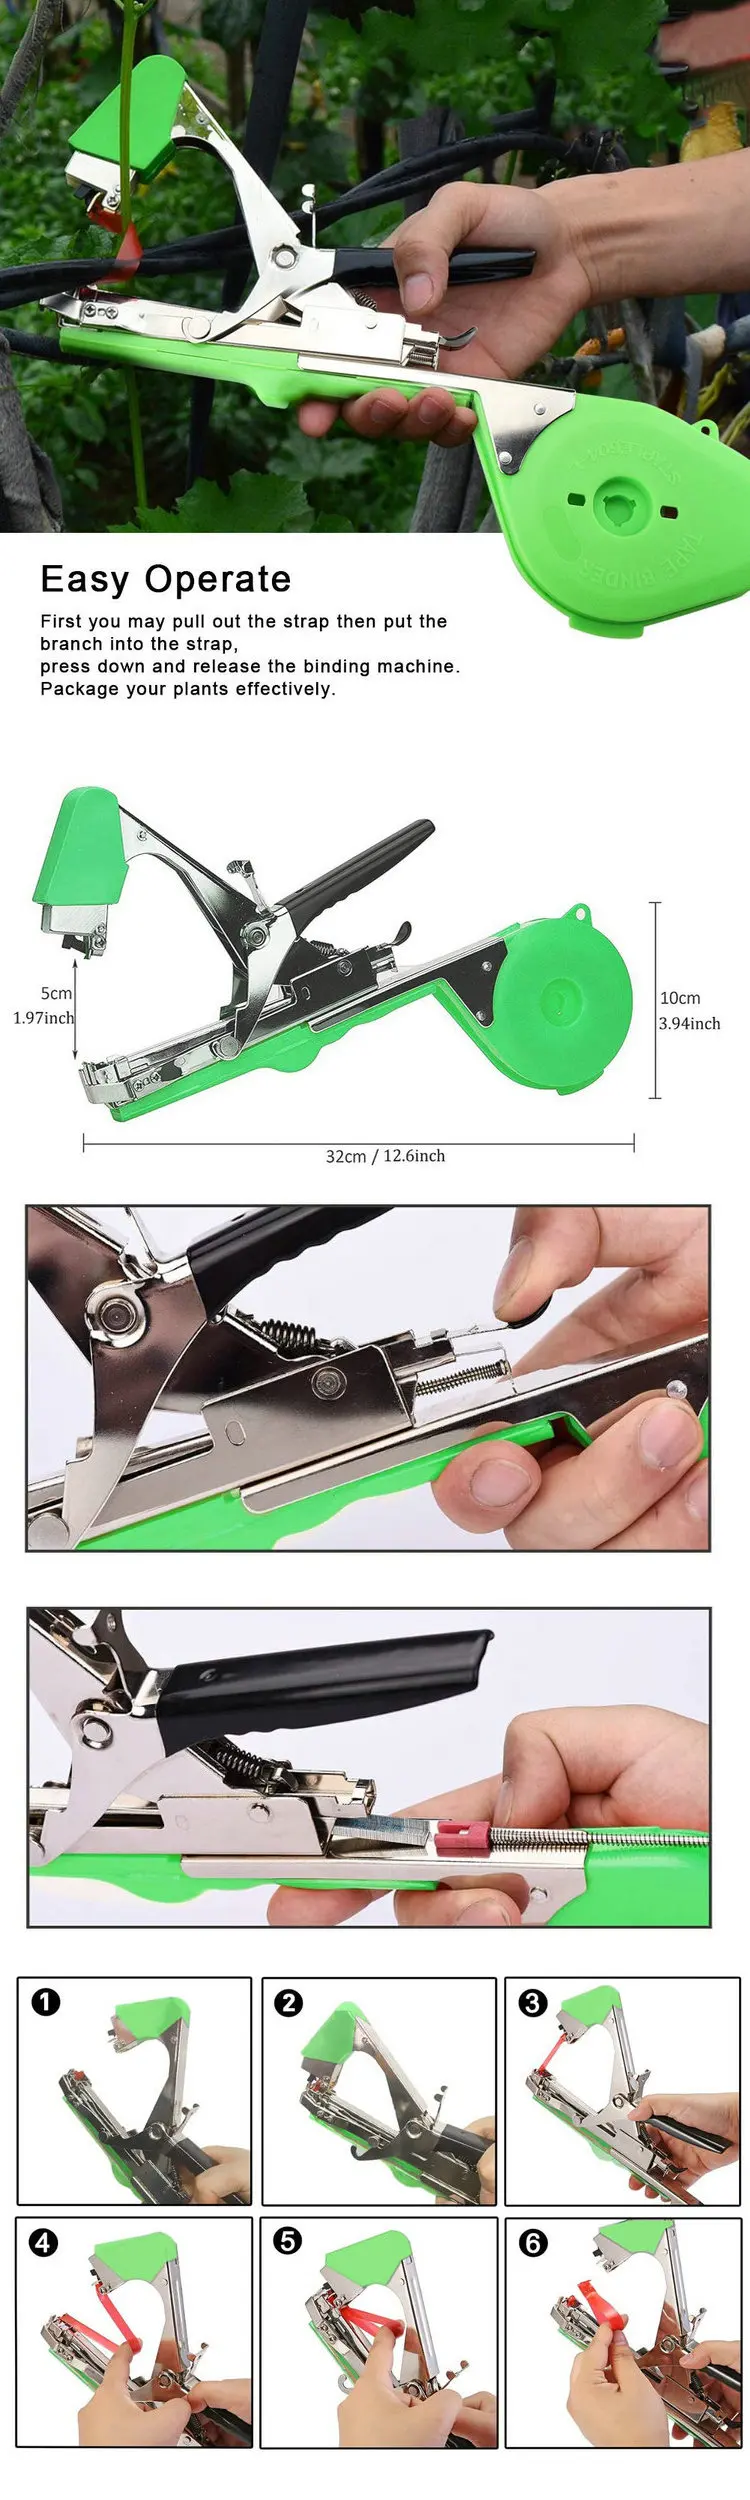 Grape SGQCAR Gardening Tapetool Tapener,Plant Tying Machine,Plant Tapener Tool Plant Tying Tool with 10000pcs Staples and 10 Rolls Tape Set Tapener Tapes for Vegetable Tomato Cucumber 